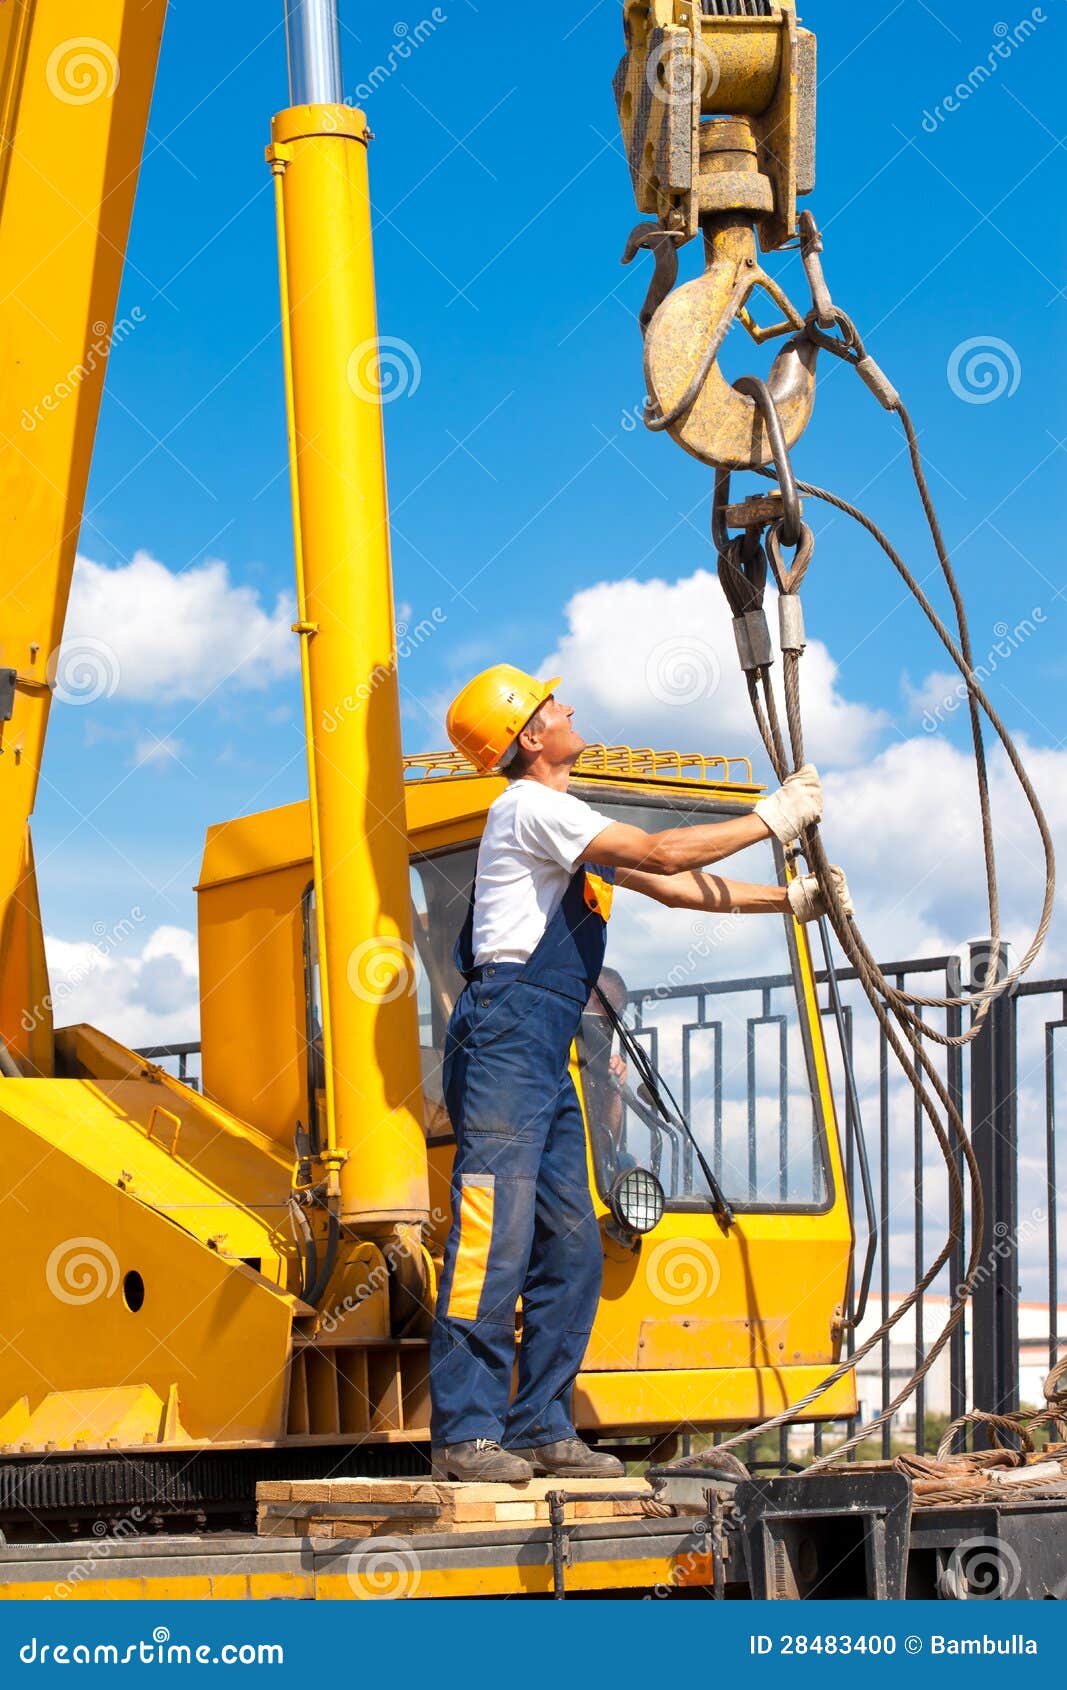 construction worker during hoisting works by a mobile crane